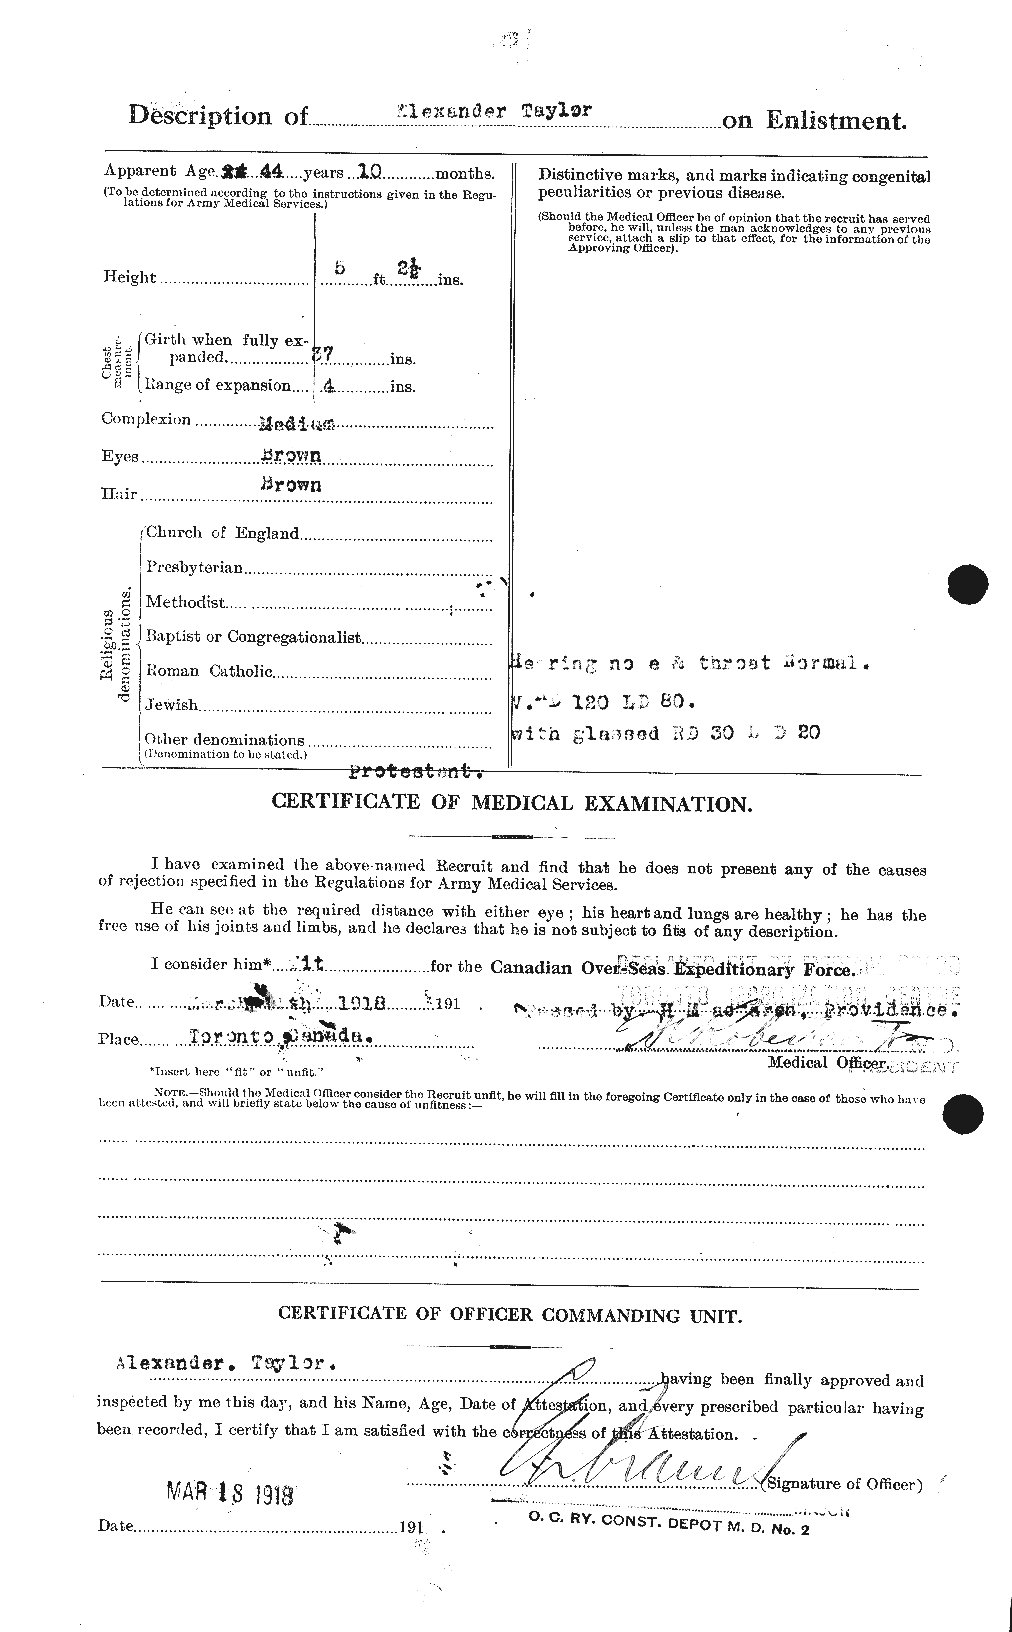 Personnel Records of the First World War - CEF 626145b